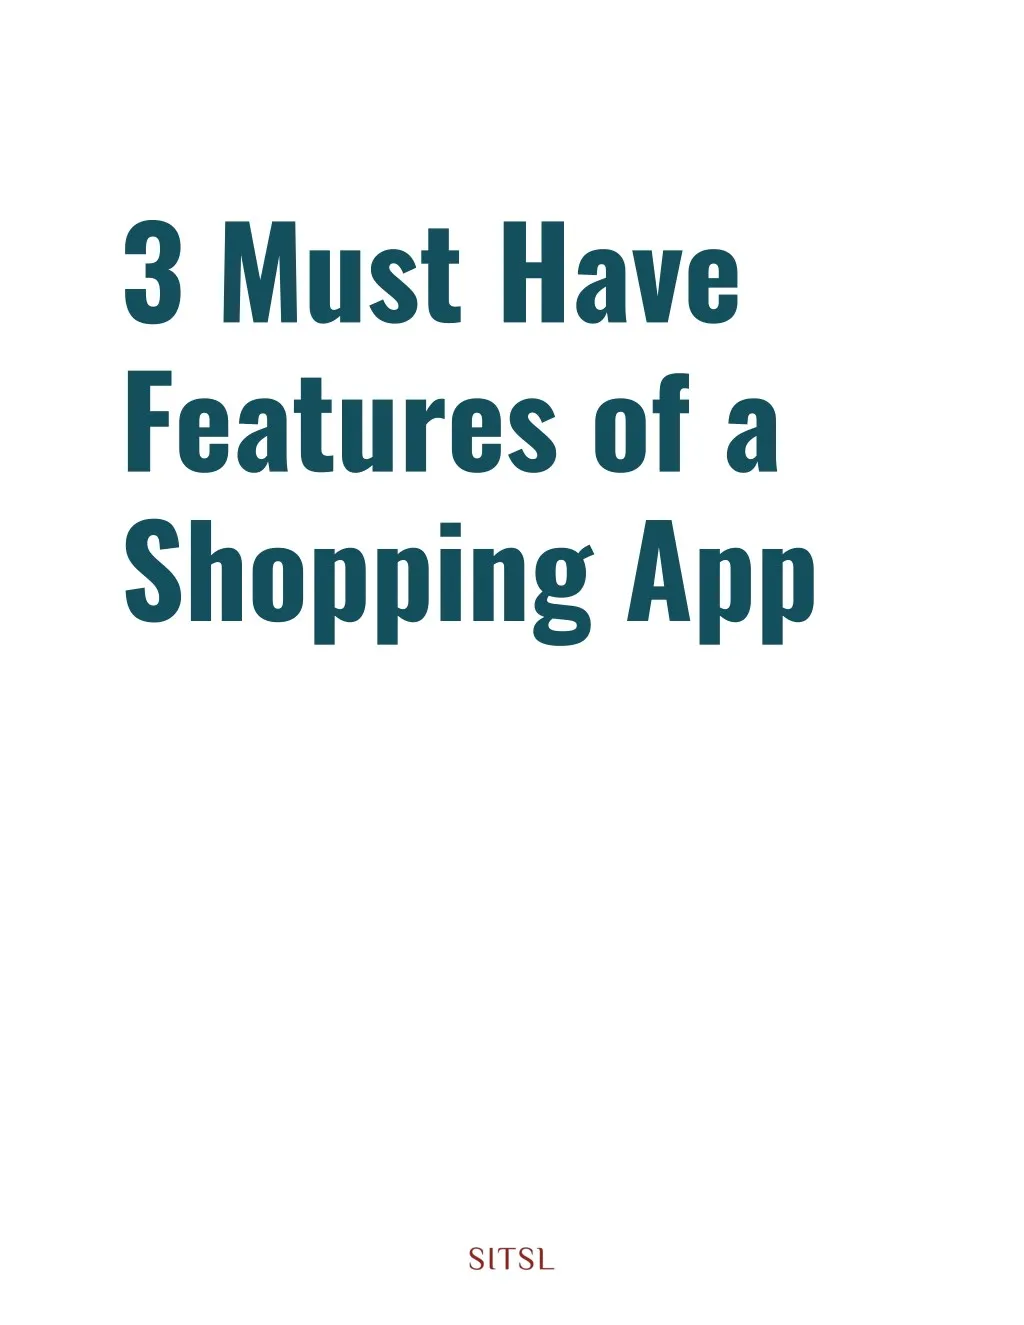 3 must have features of a shopping app